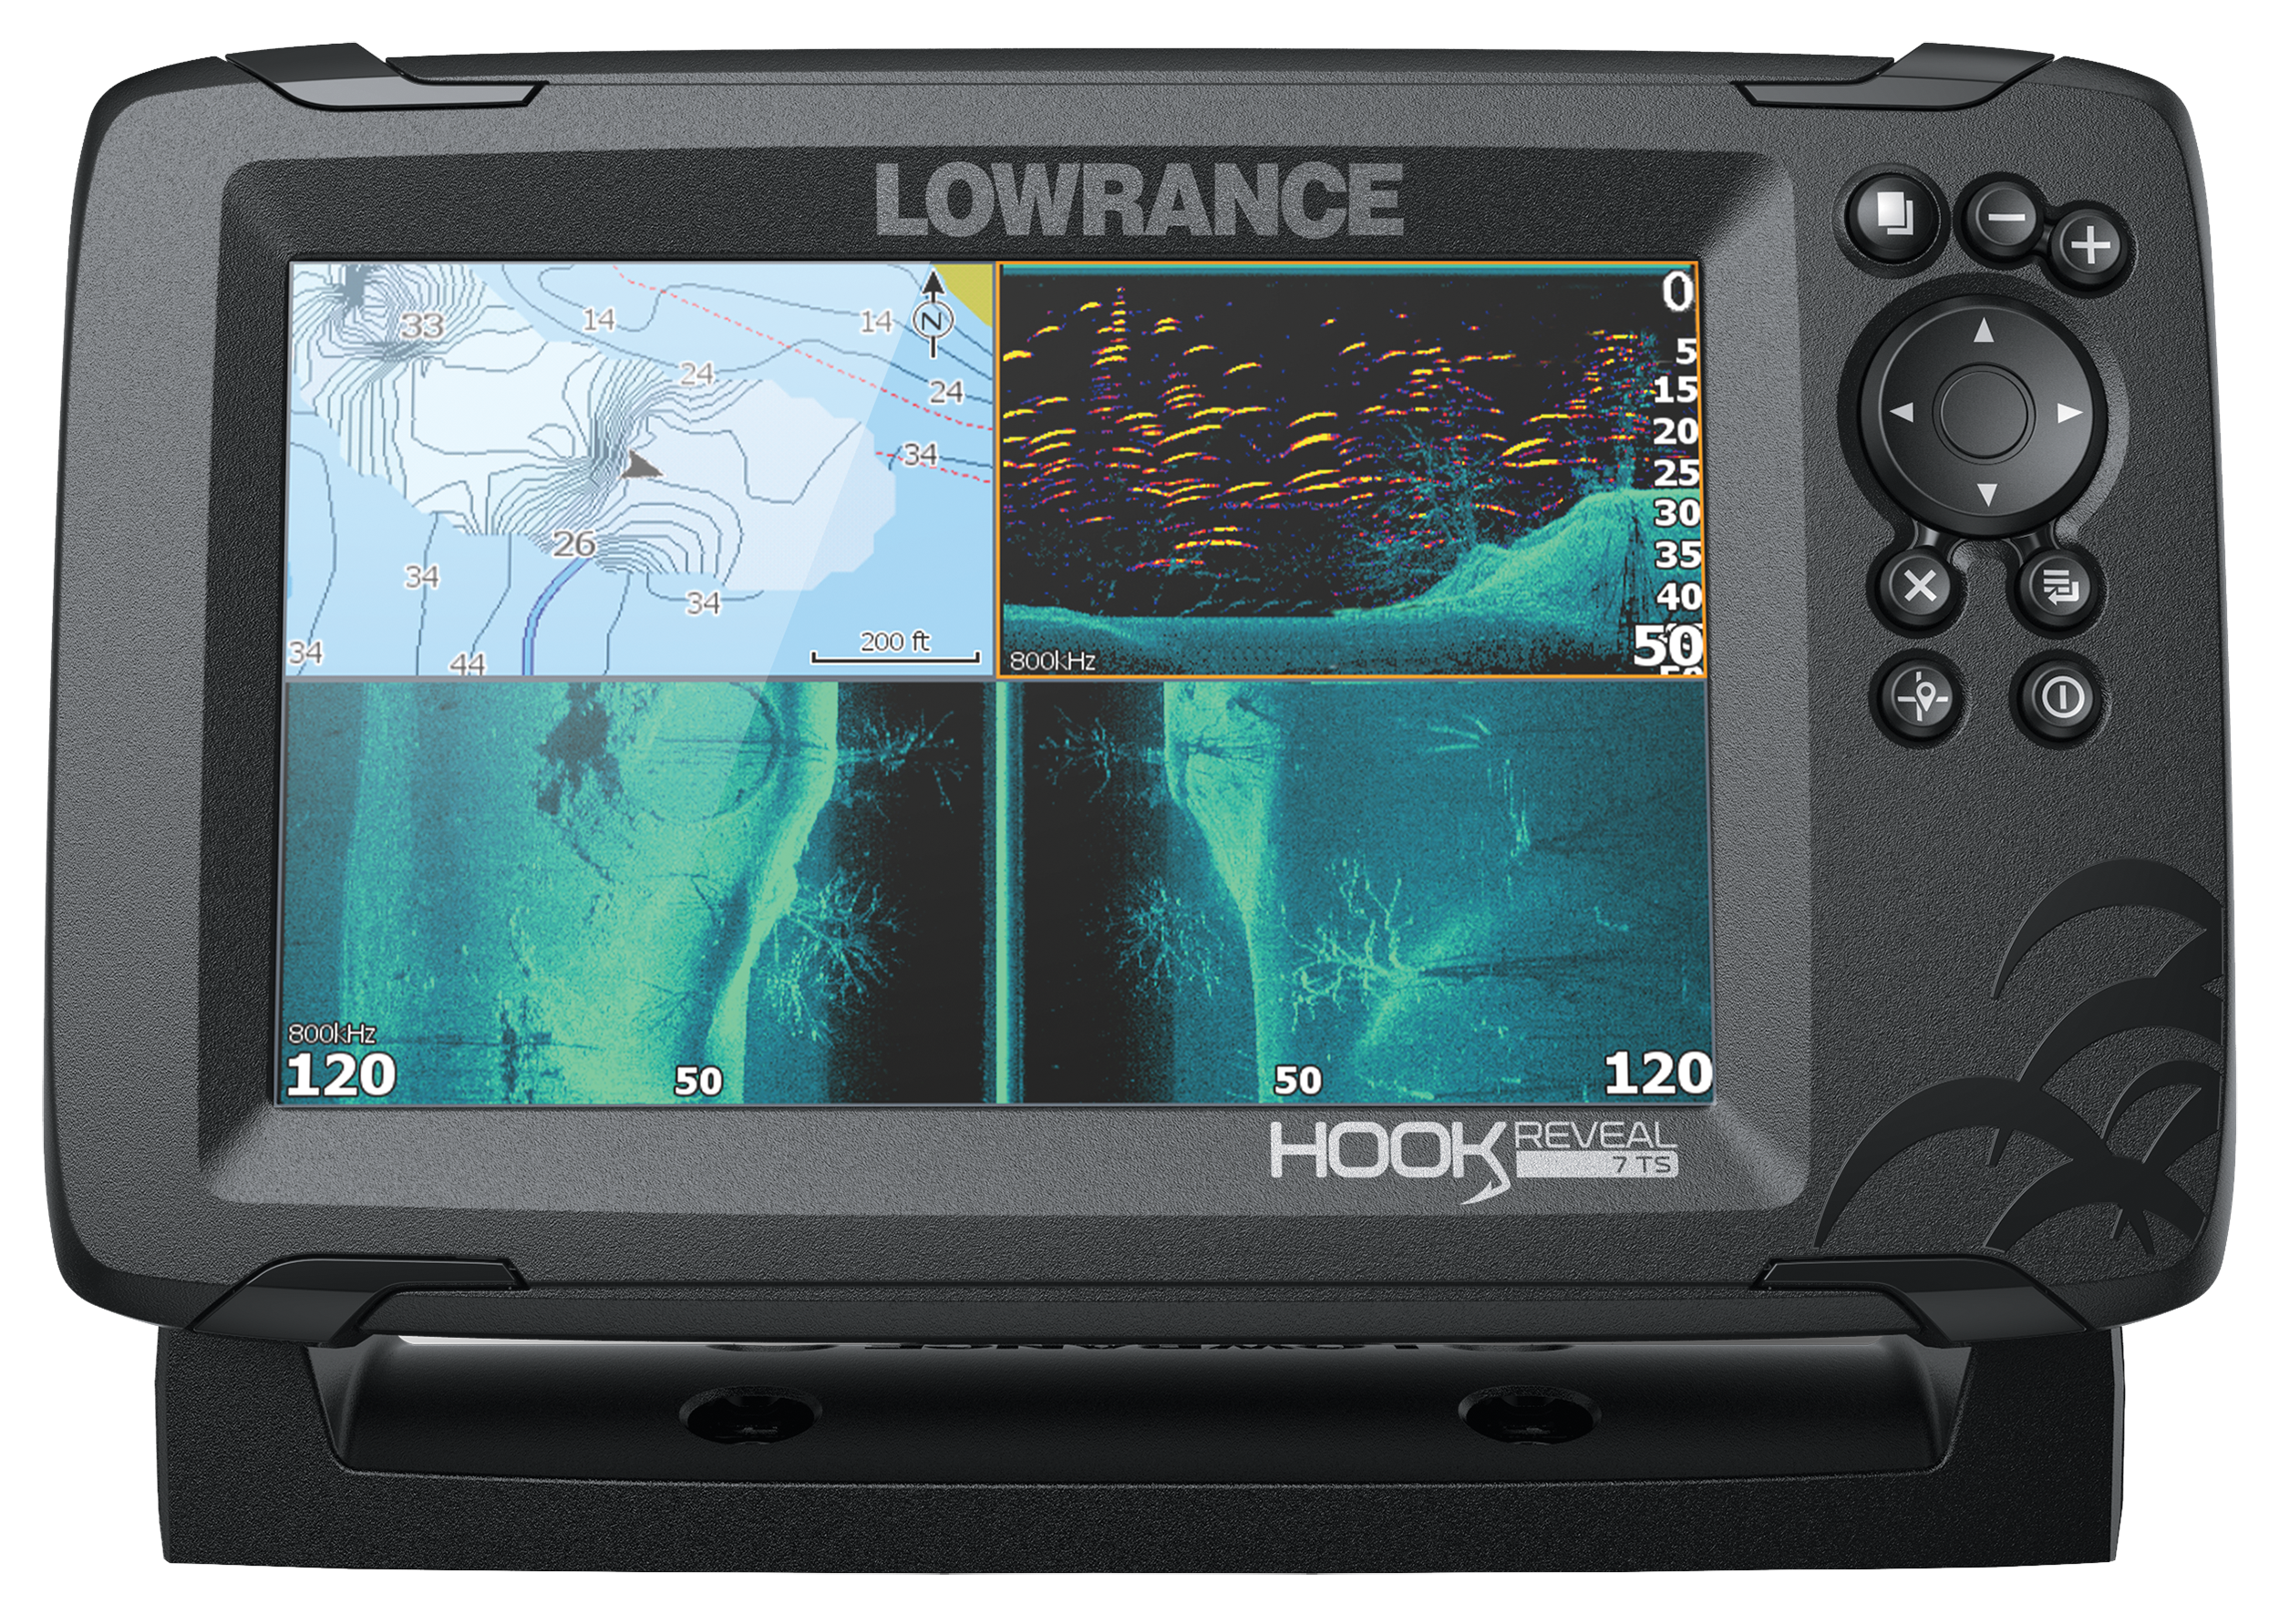 Lowrance HOOK Reveal 7 Fish Finder - 7 TS US Inland